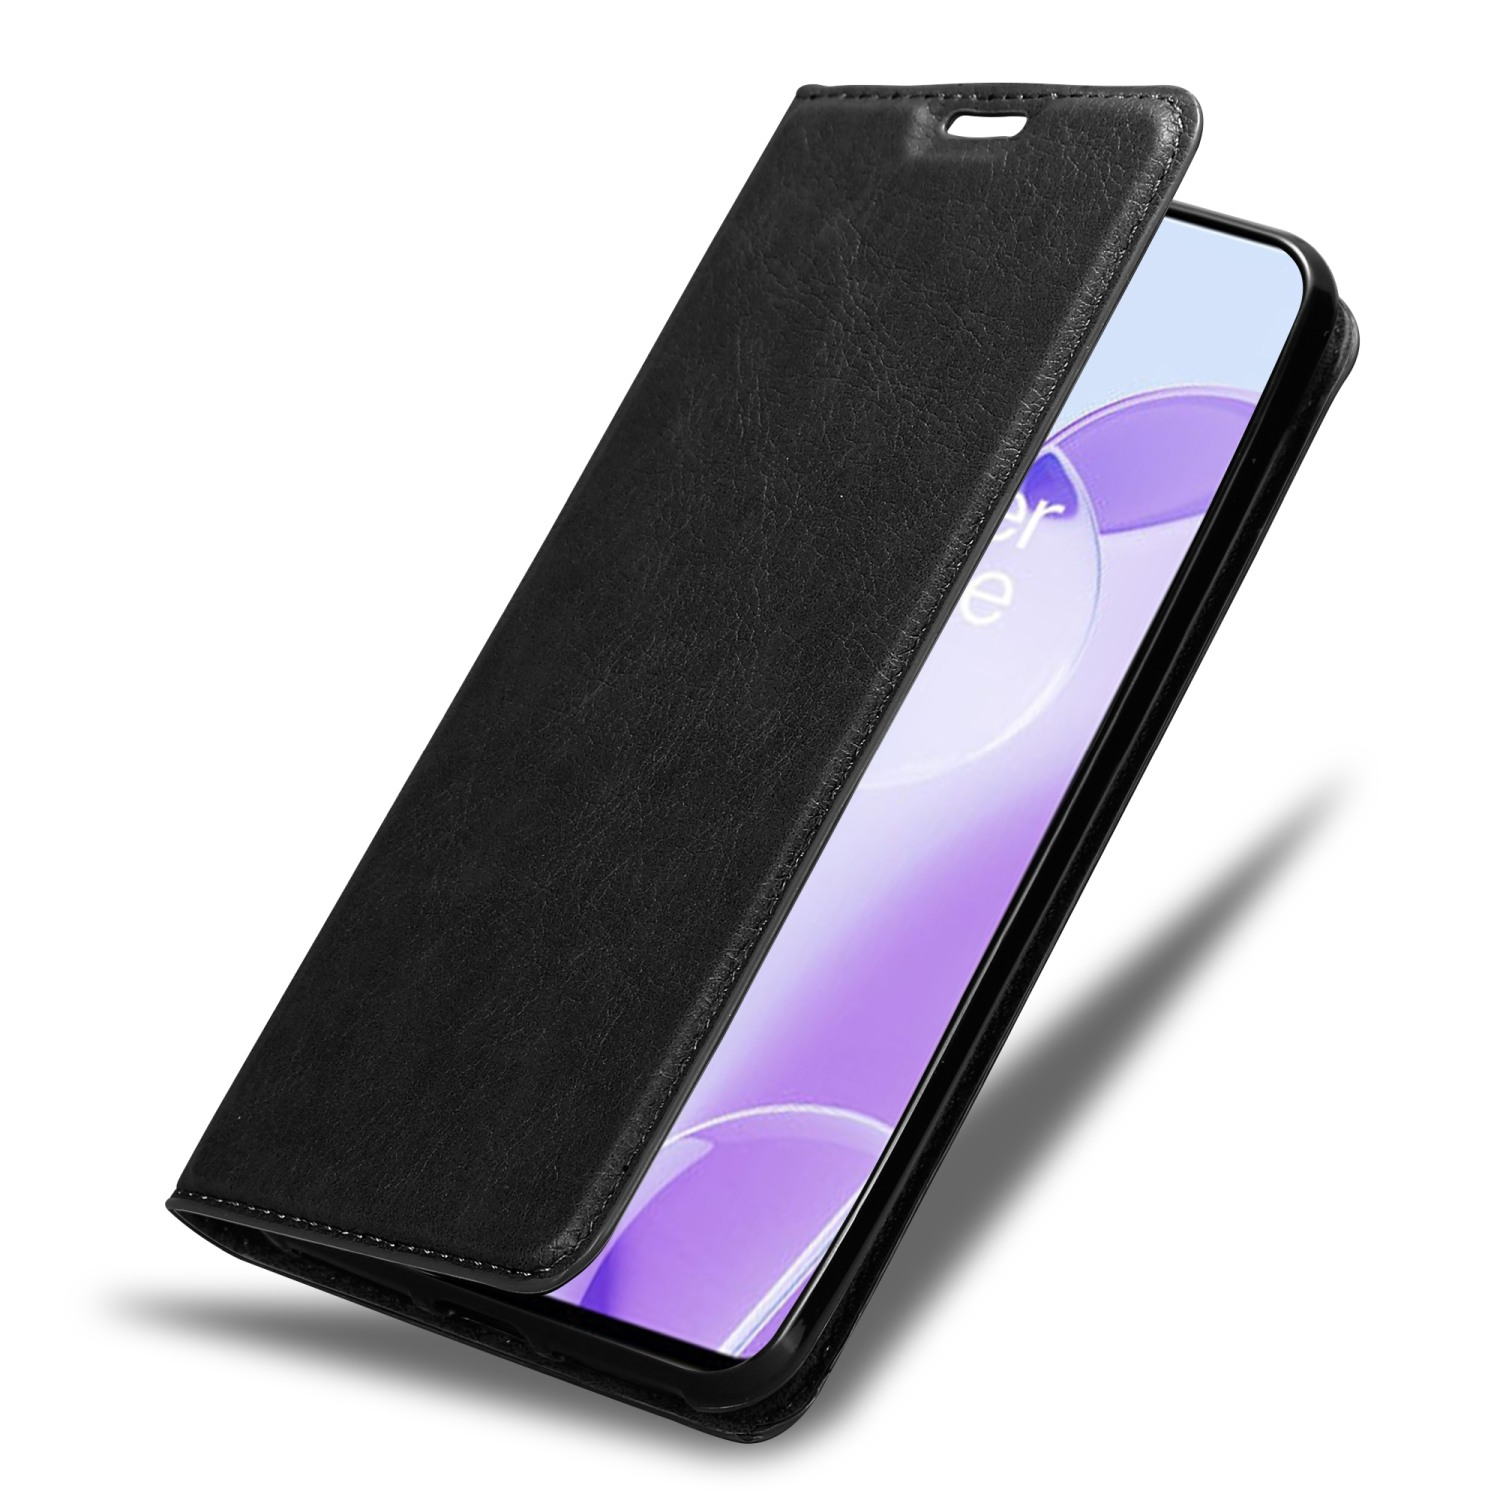 OnePlus, 9RT Bookcover, Invisible NACHT SCHWARZ Book 5G, Magnet, CADORABO Hülle